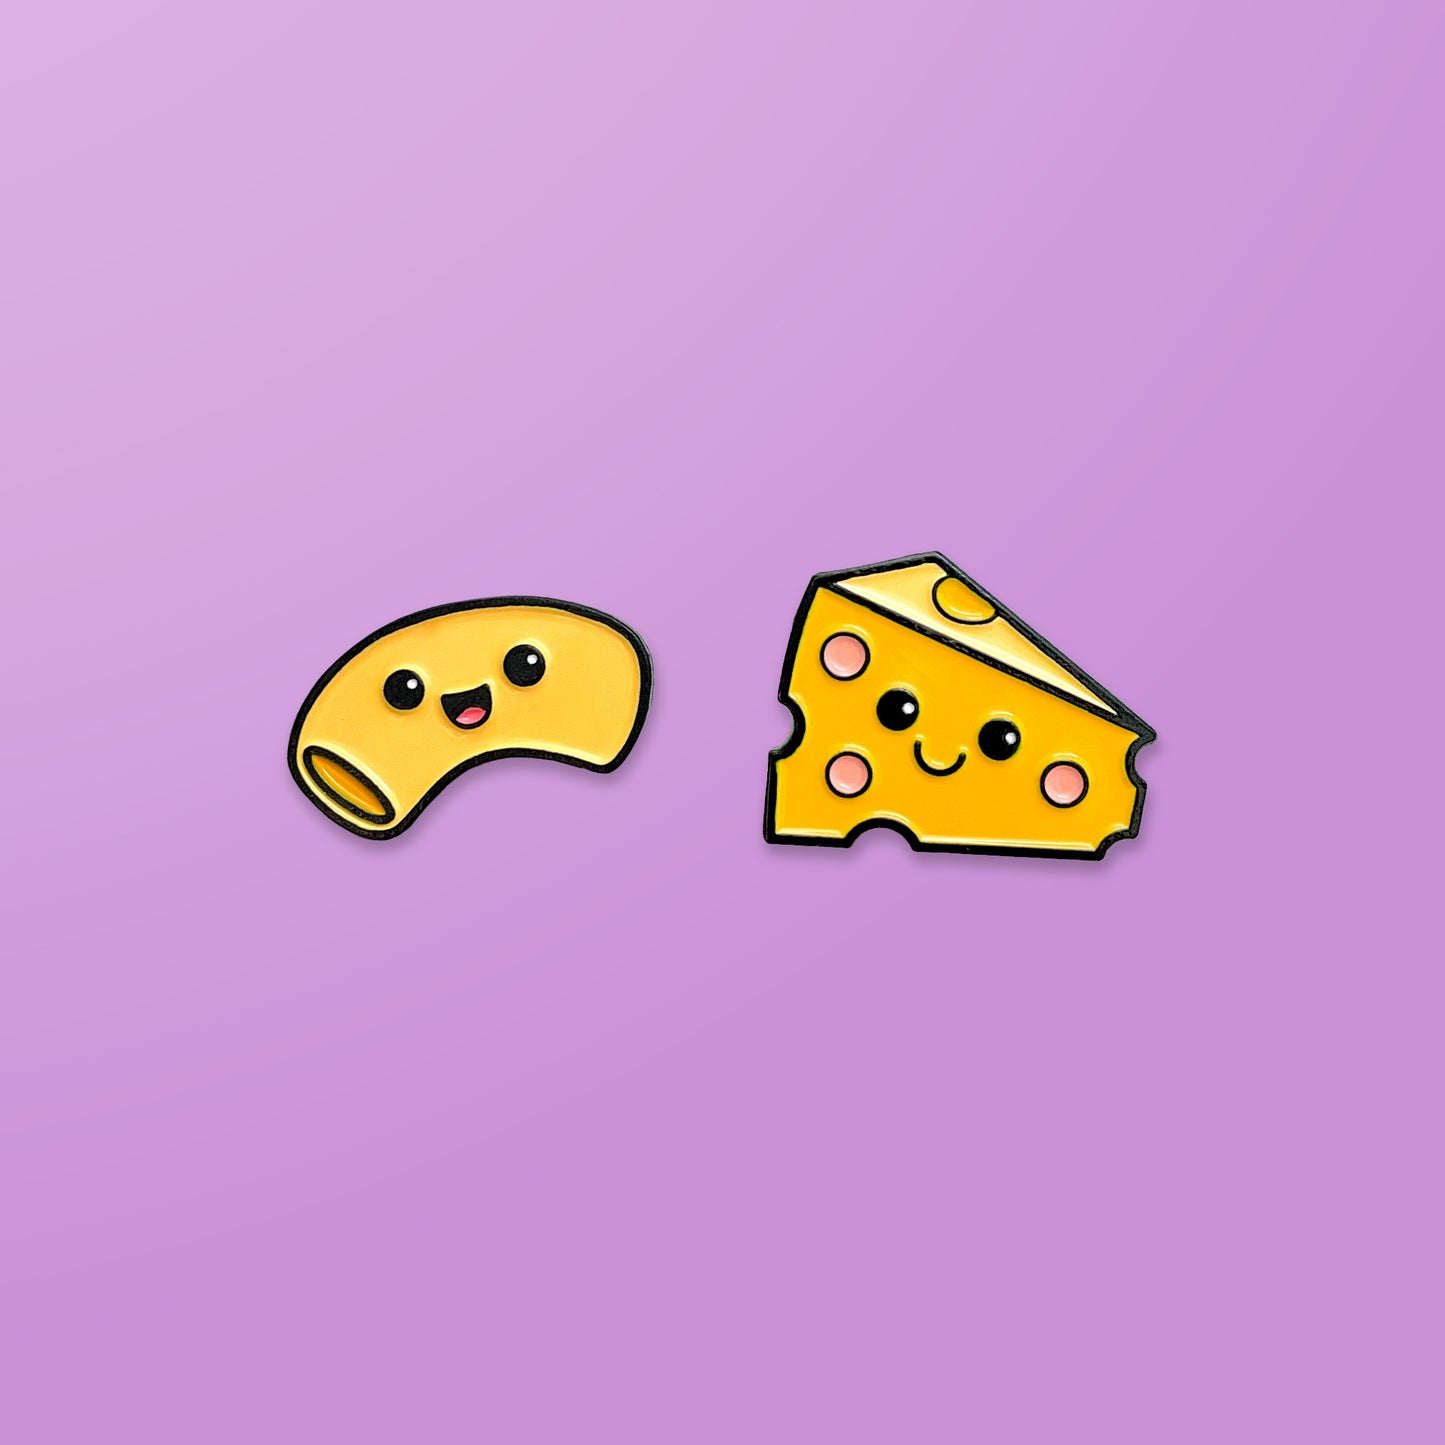 Mac and Cheese enamel pin set on purple background